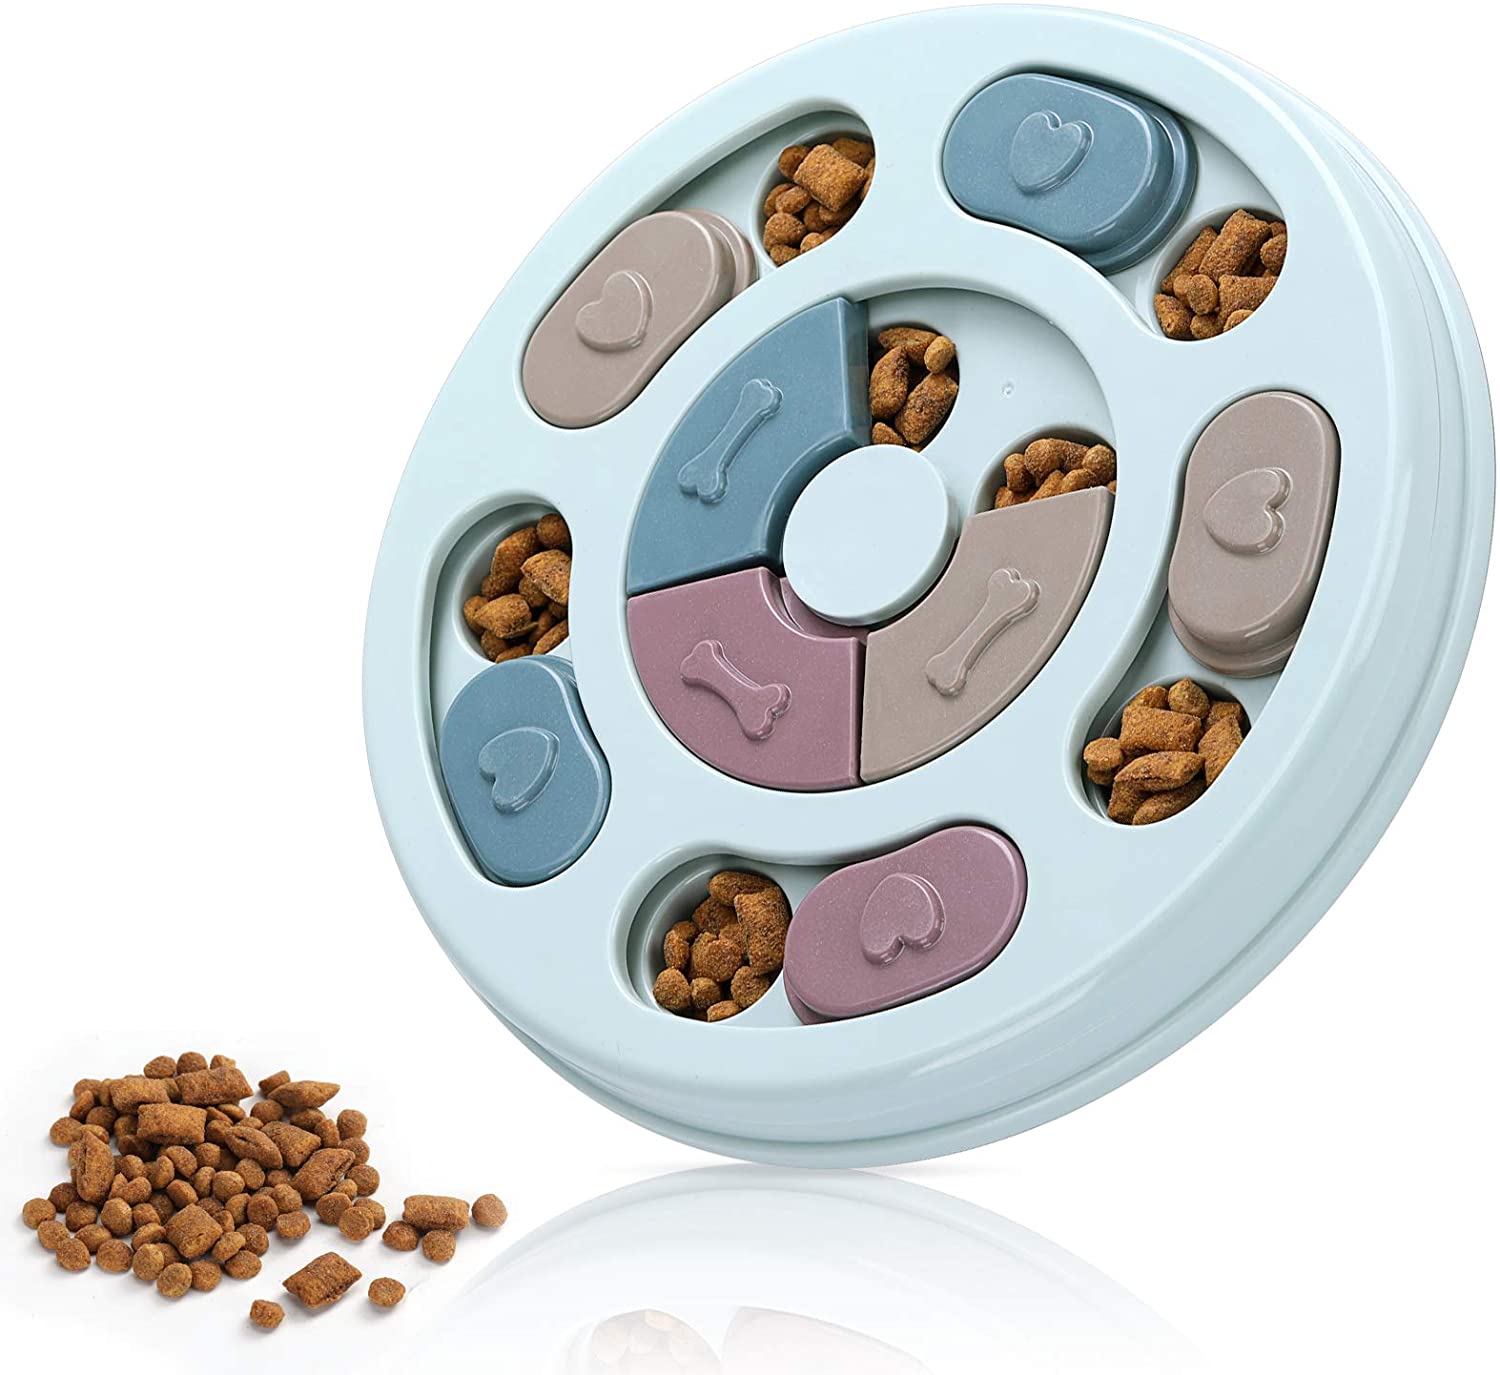 DR CATCH Puzzle Treat Feeder Toy Dog Accessory